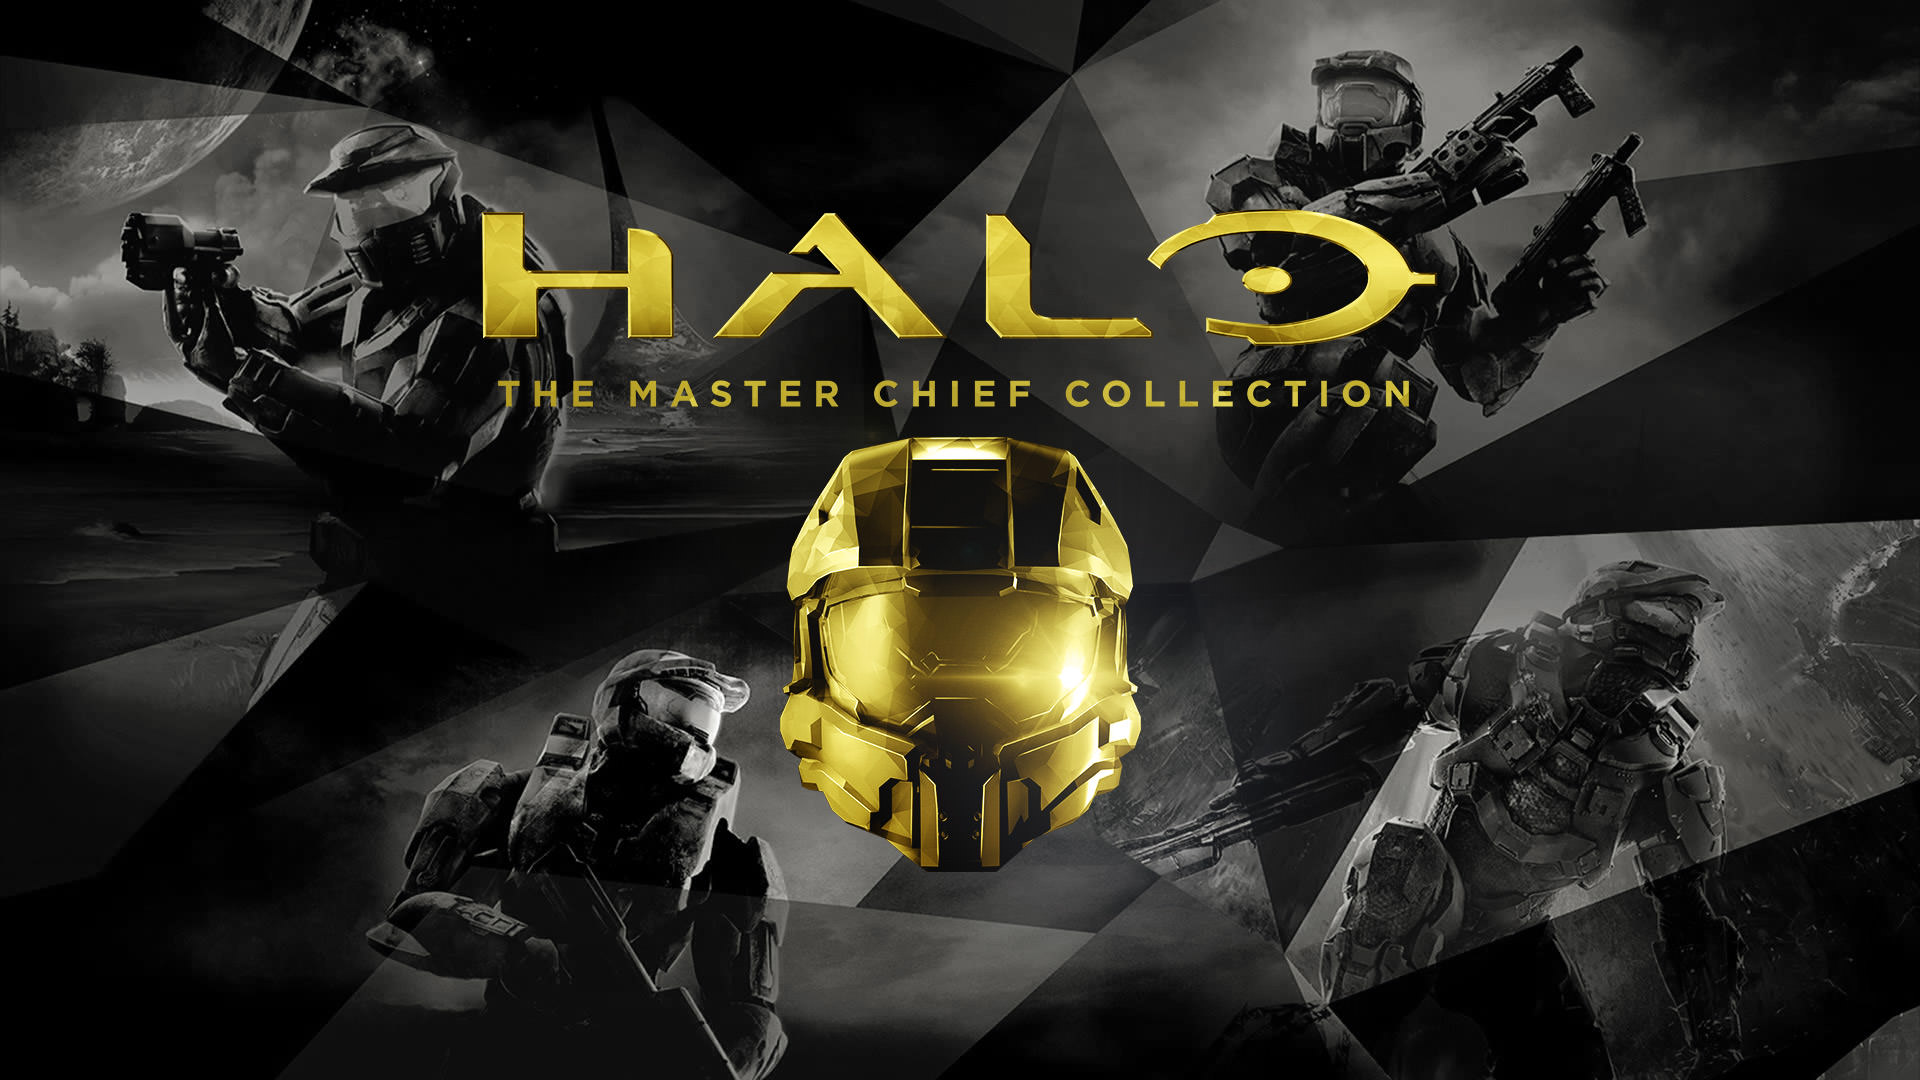 halo the master chief collection poster  Image of halo the master chief collection poster